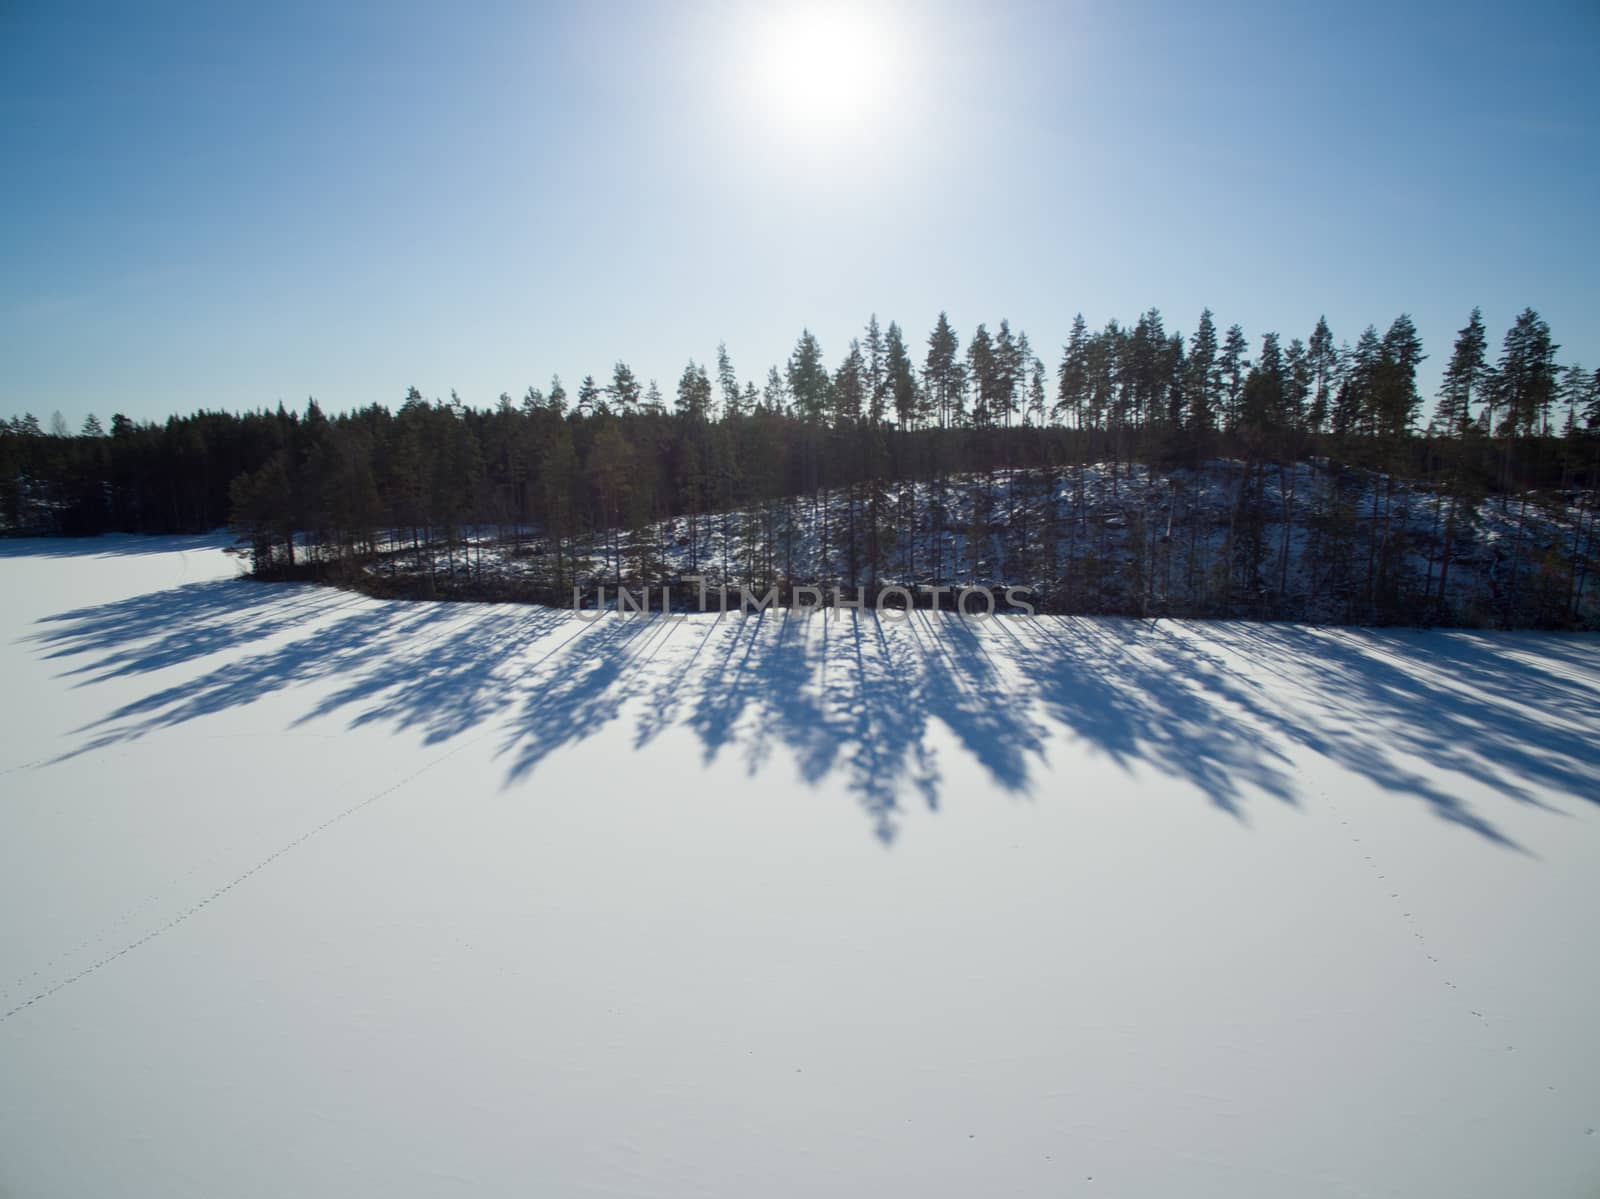 Winter sun is low but bright thanks to the reflection on the snow